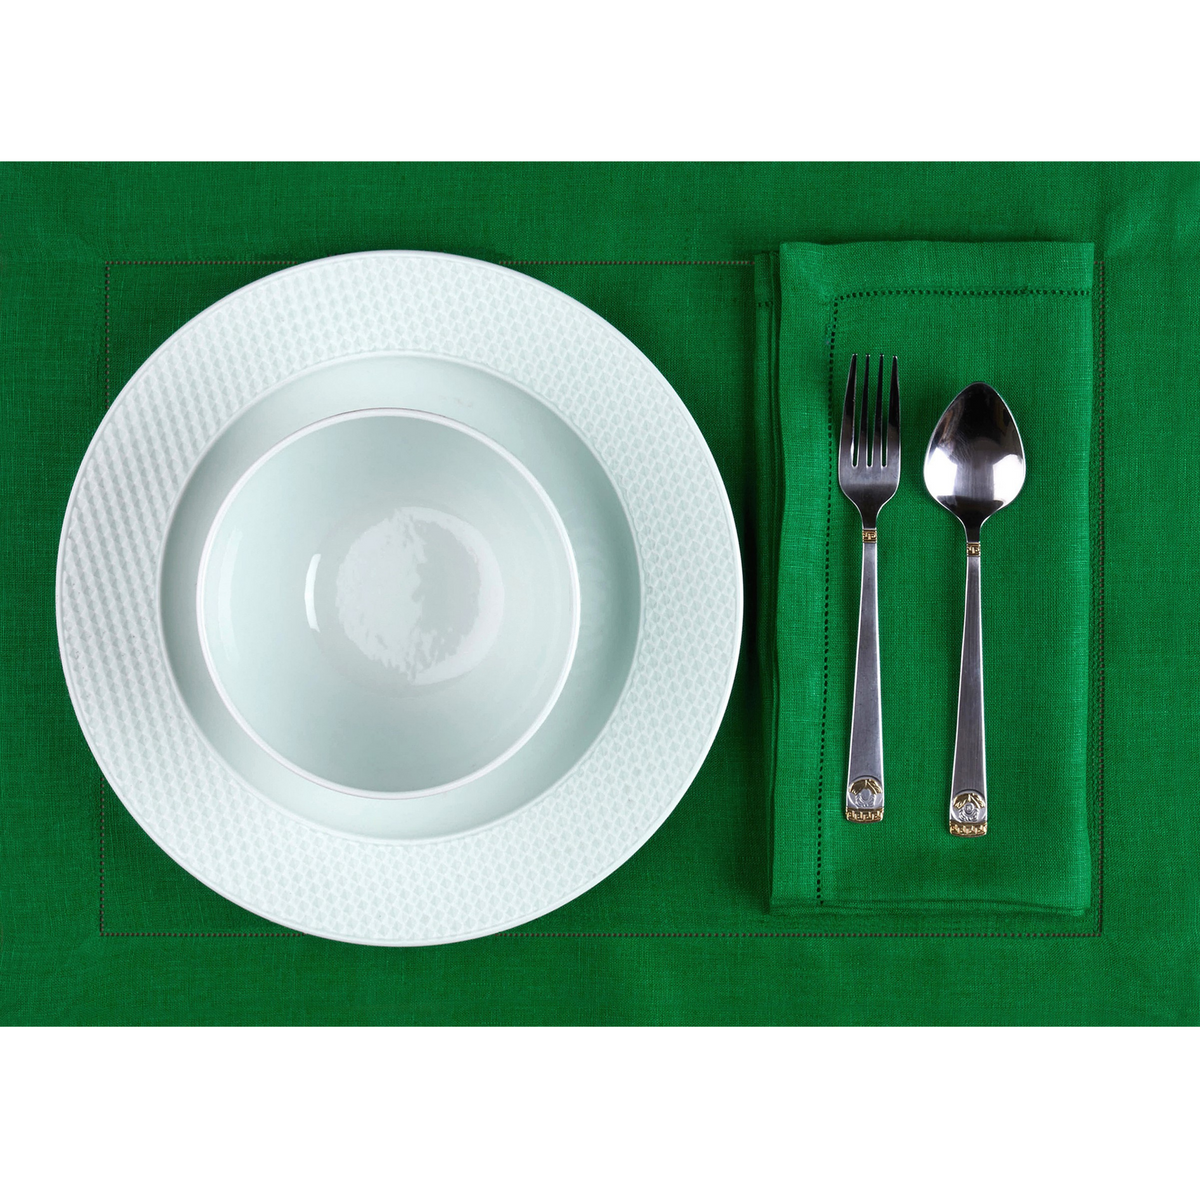 Kelly Green Linen Placemats 14 x 19 Inch Set of 4 - Hemstitch